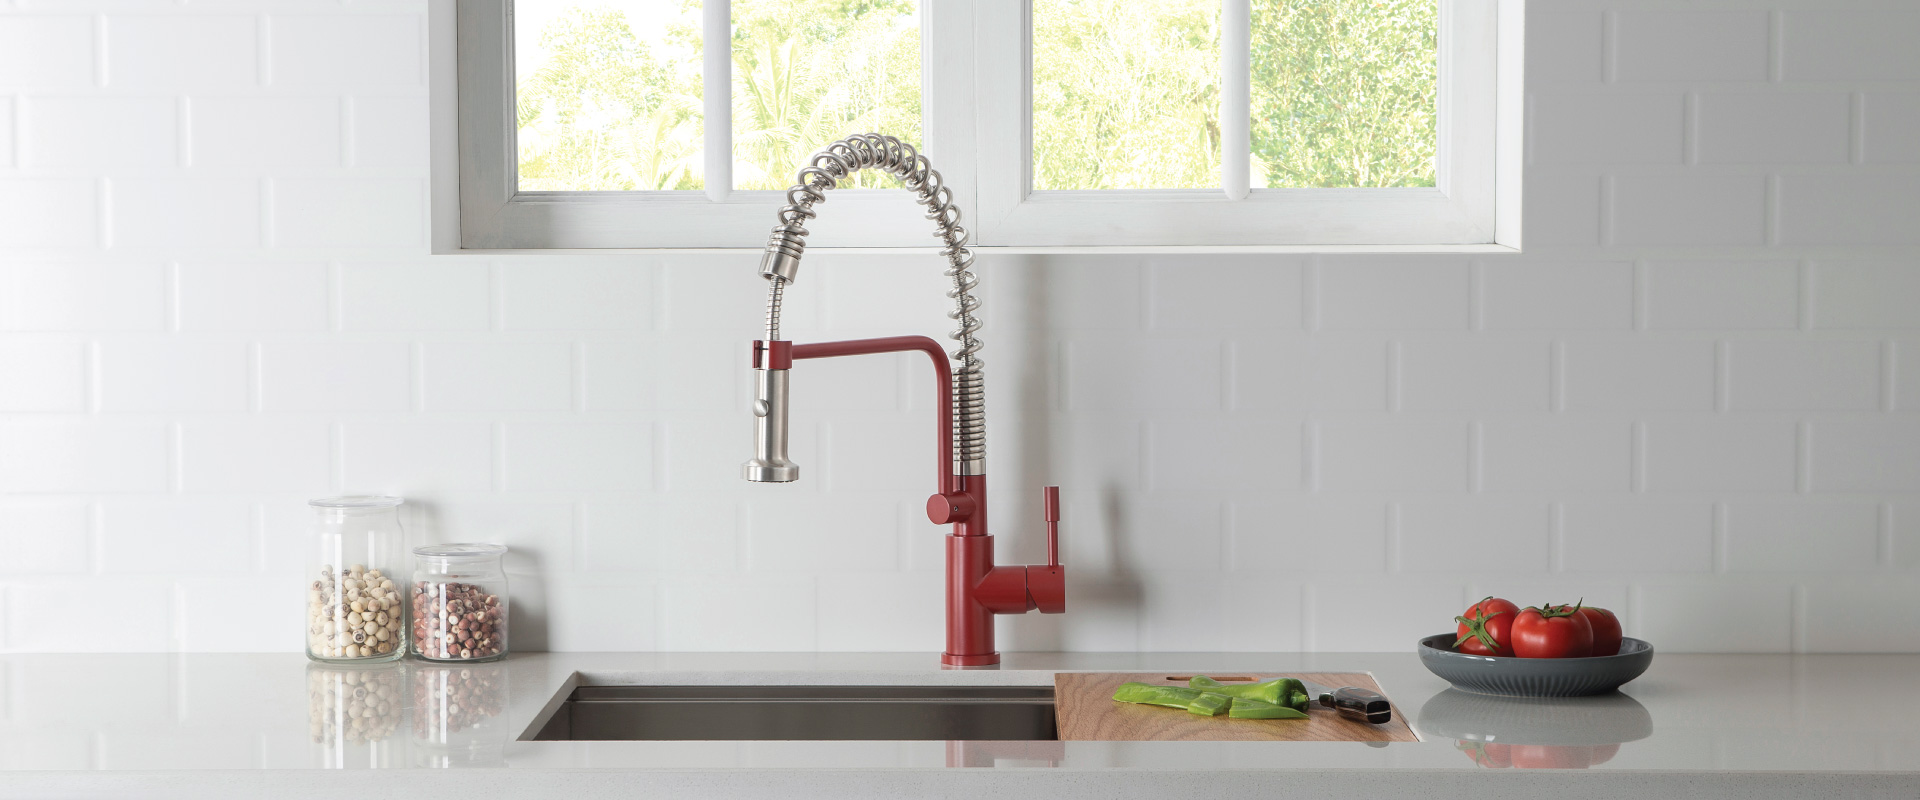 red kitchen faucet